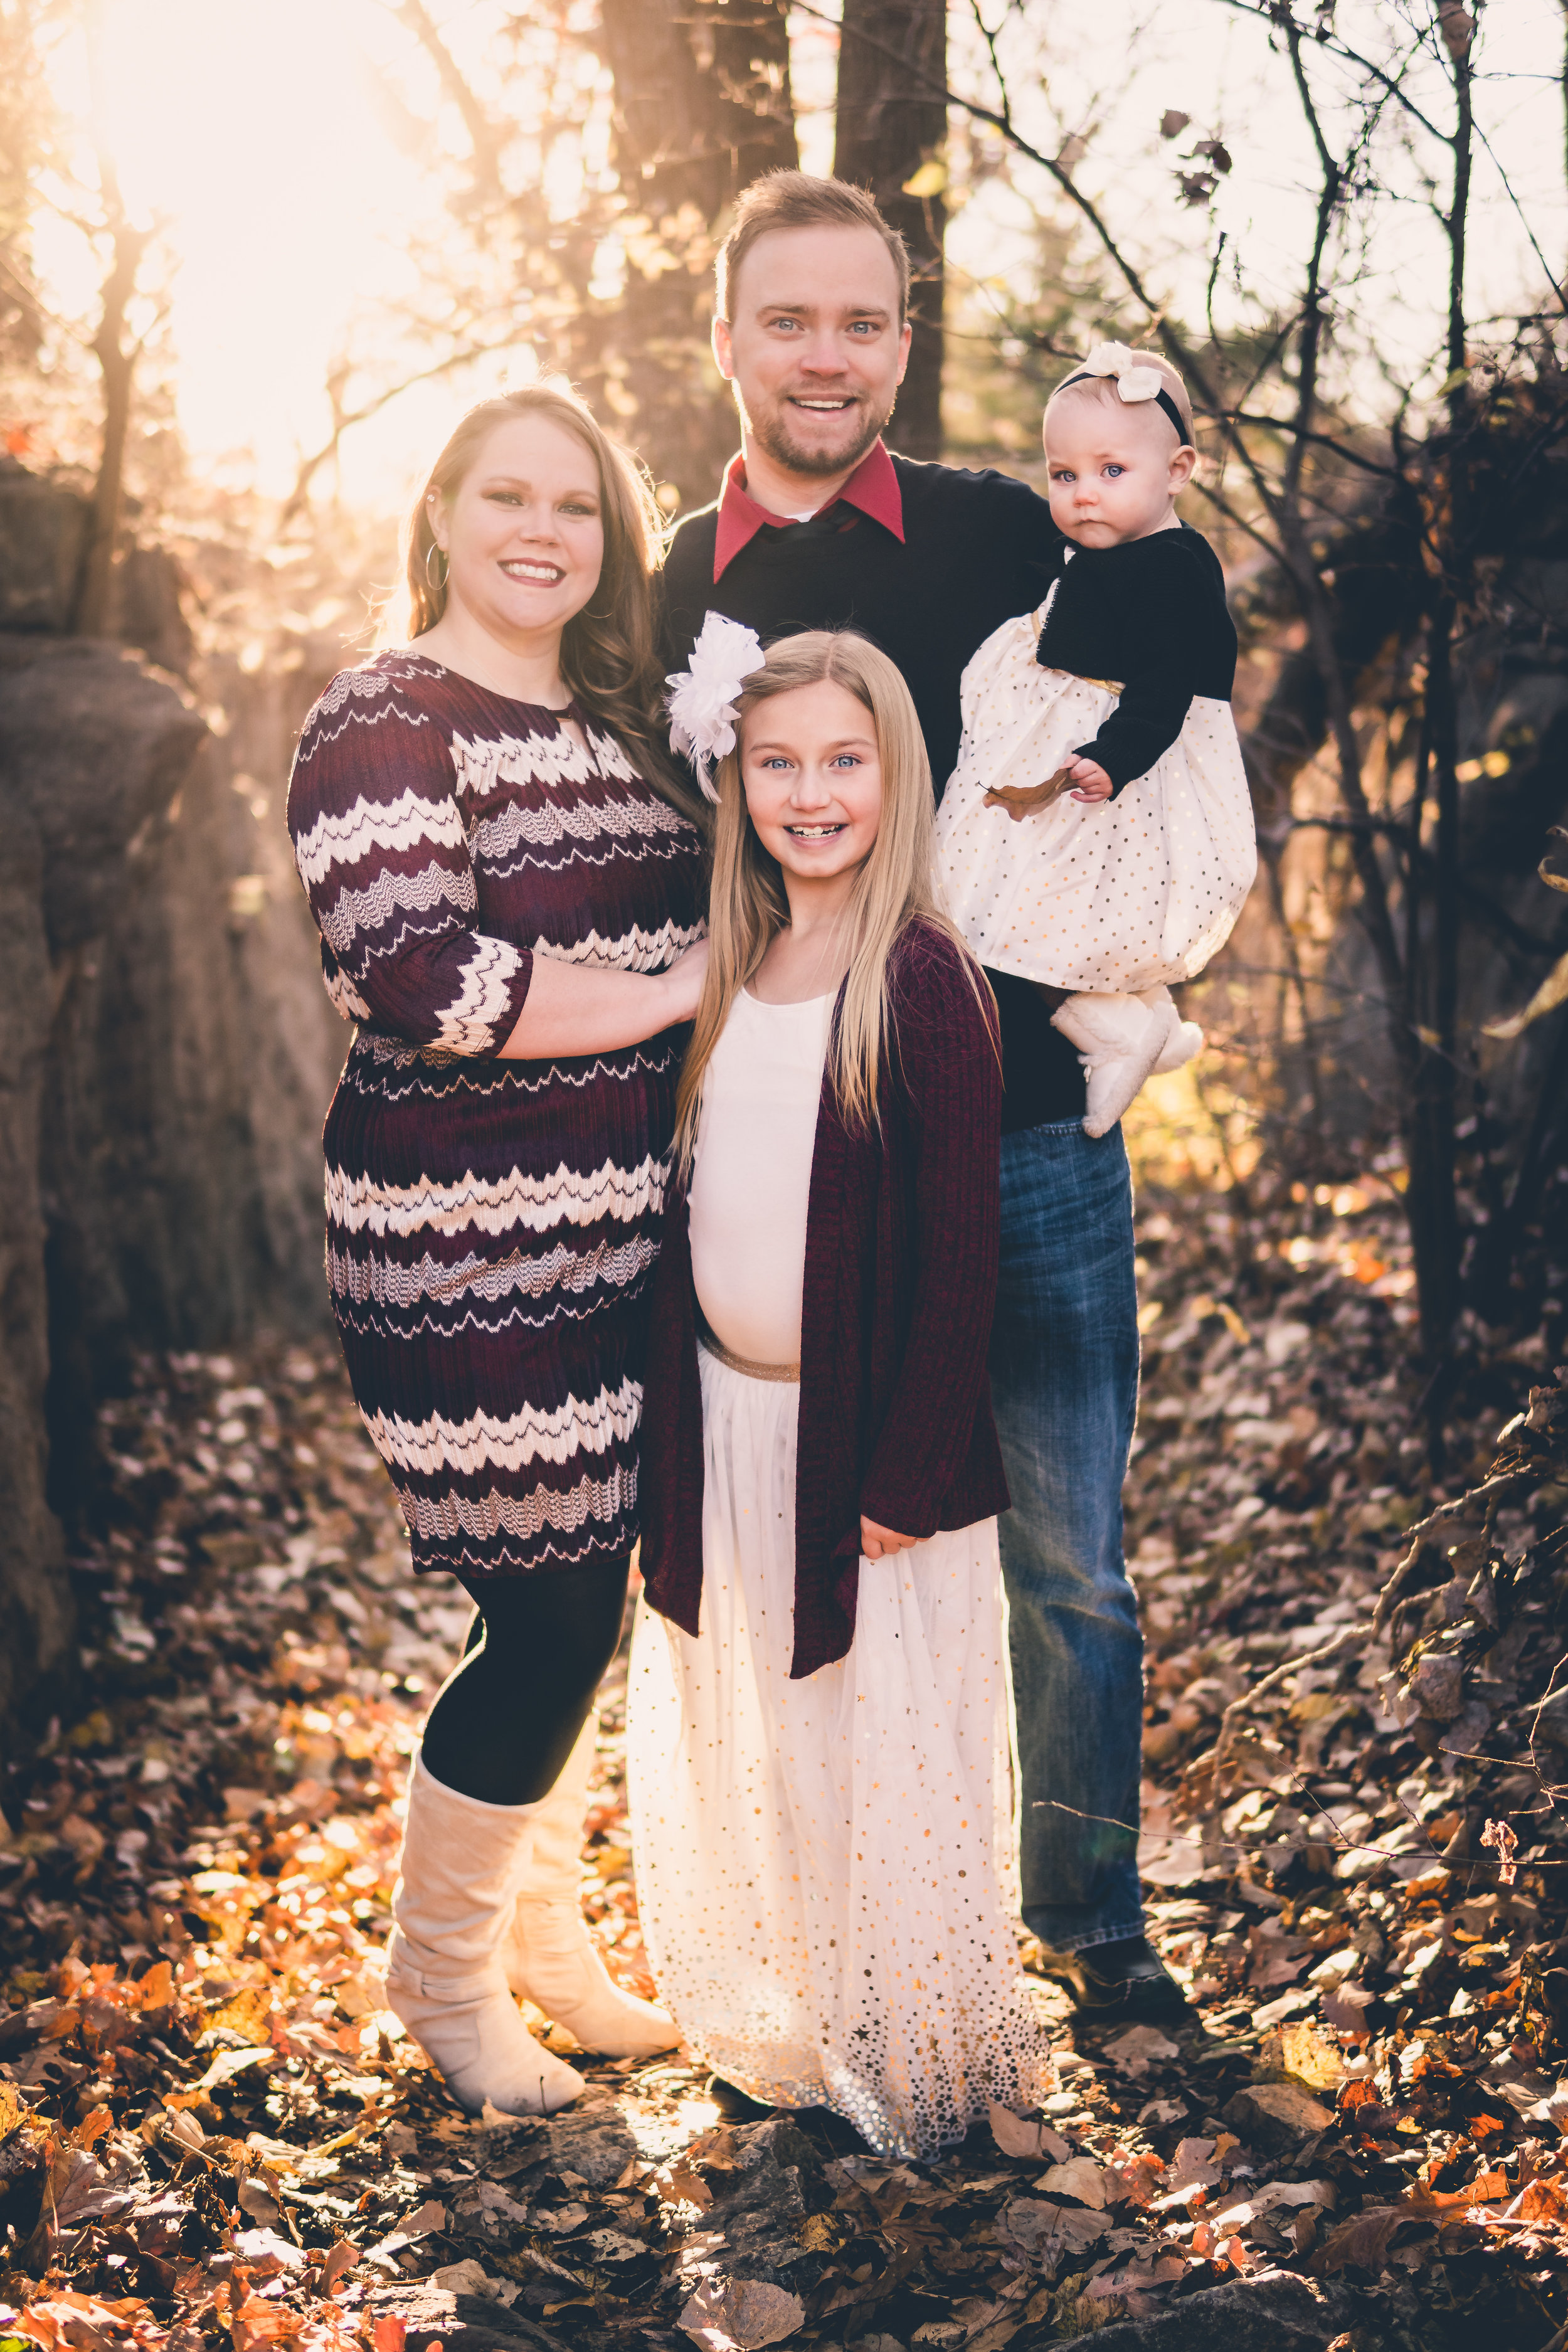 Herms Family Christmas Photo Shoot - Bound For Glory Productions-2.jpg